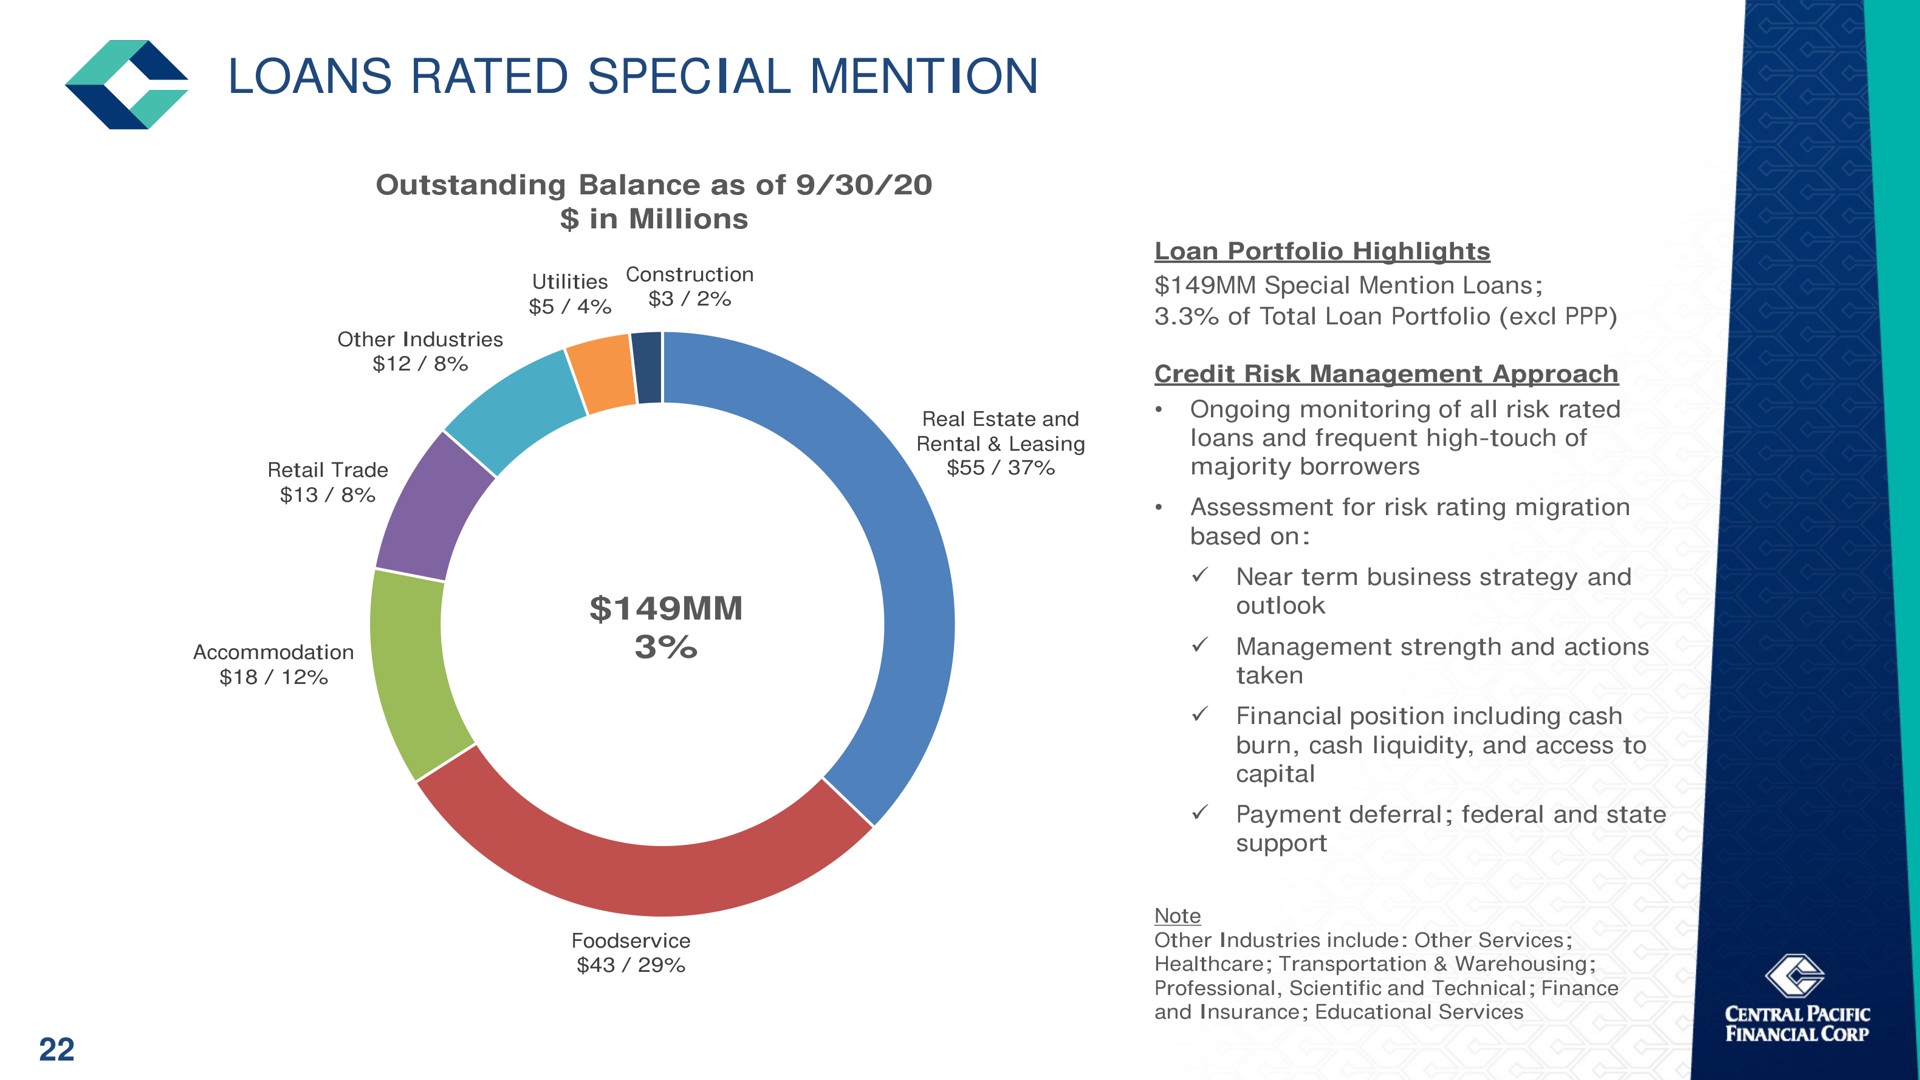 loans rated special mention | Central Pacific Financial